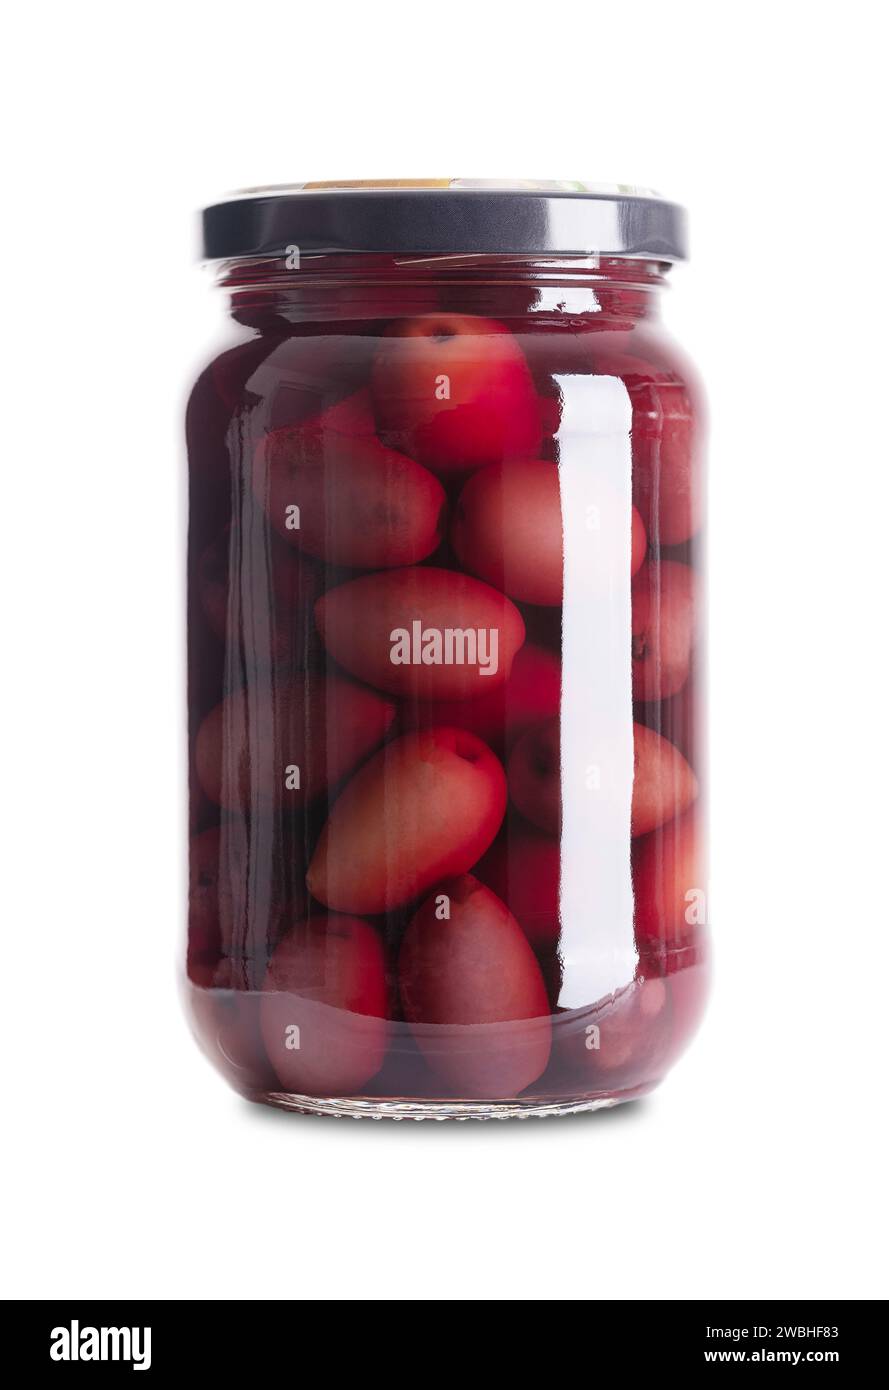 Kalamata olives, pickled whole, large and dark purple table olives, in a glass jar with screw cap. Olive variety from Kalamata region in Greece. Stock Photo